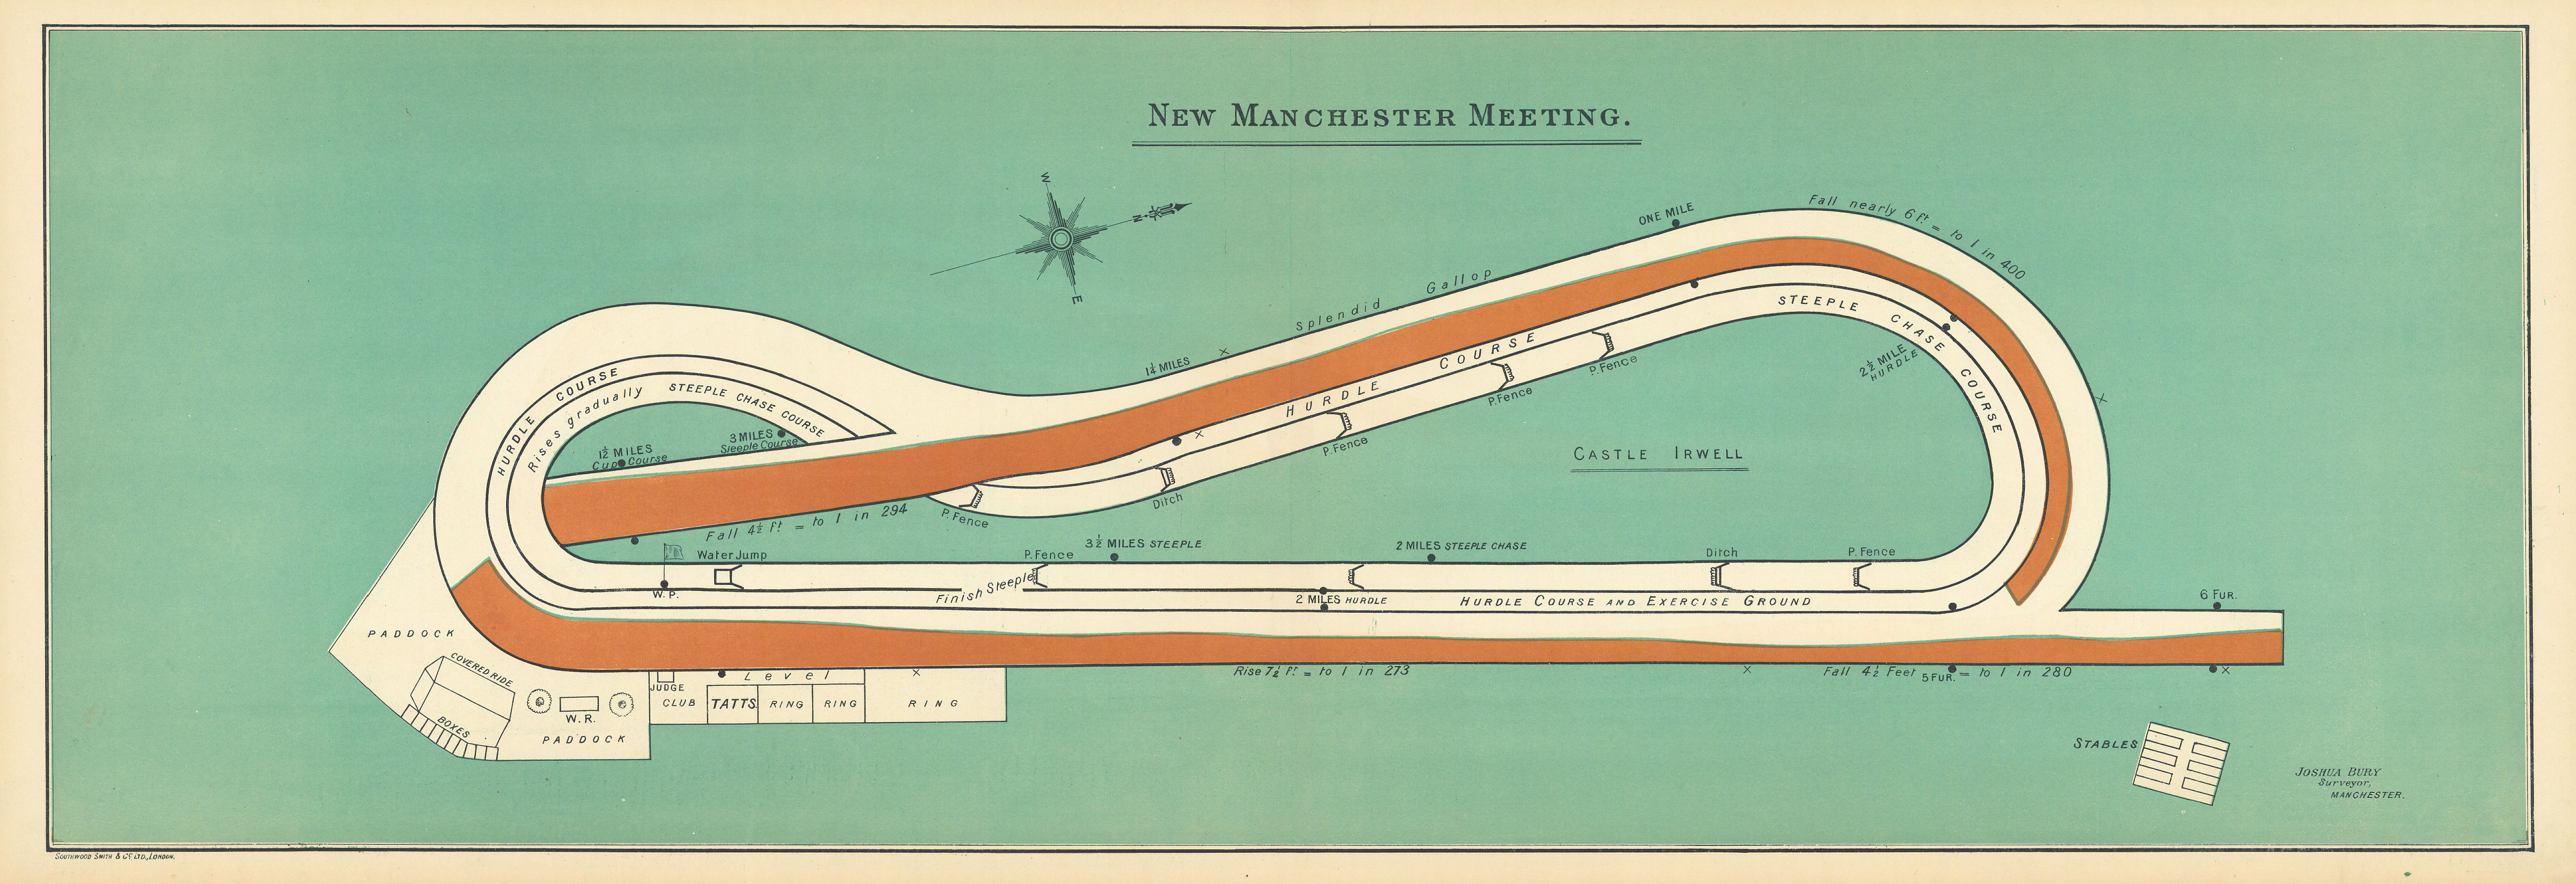 New Manchester Meeting racecourse, Castle Irwell. Closed 1963. BAYLES 1903 map